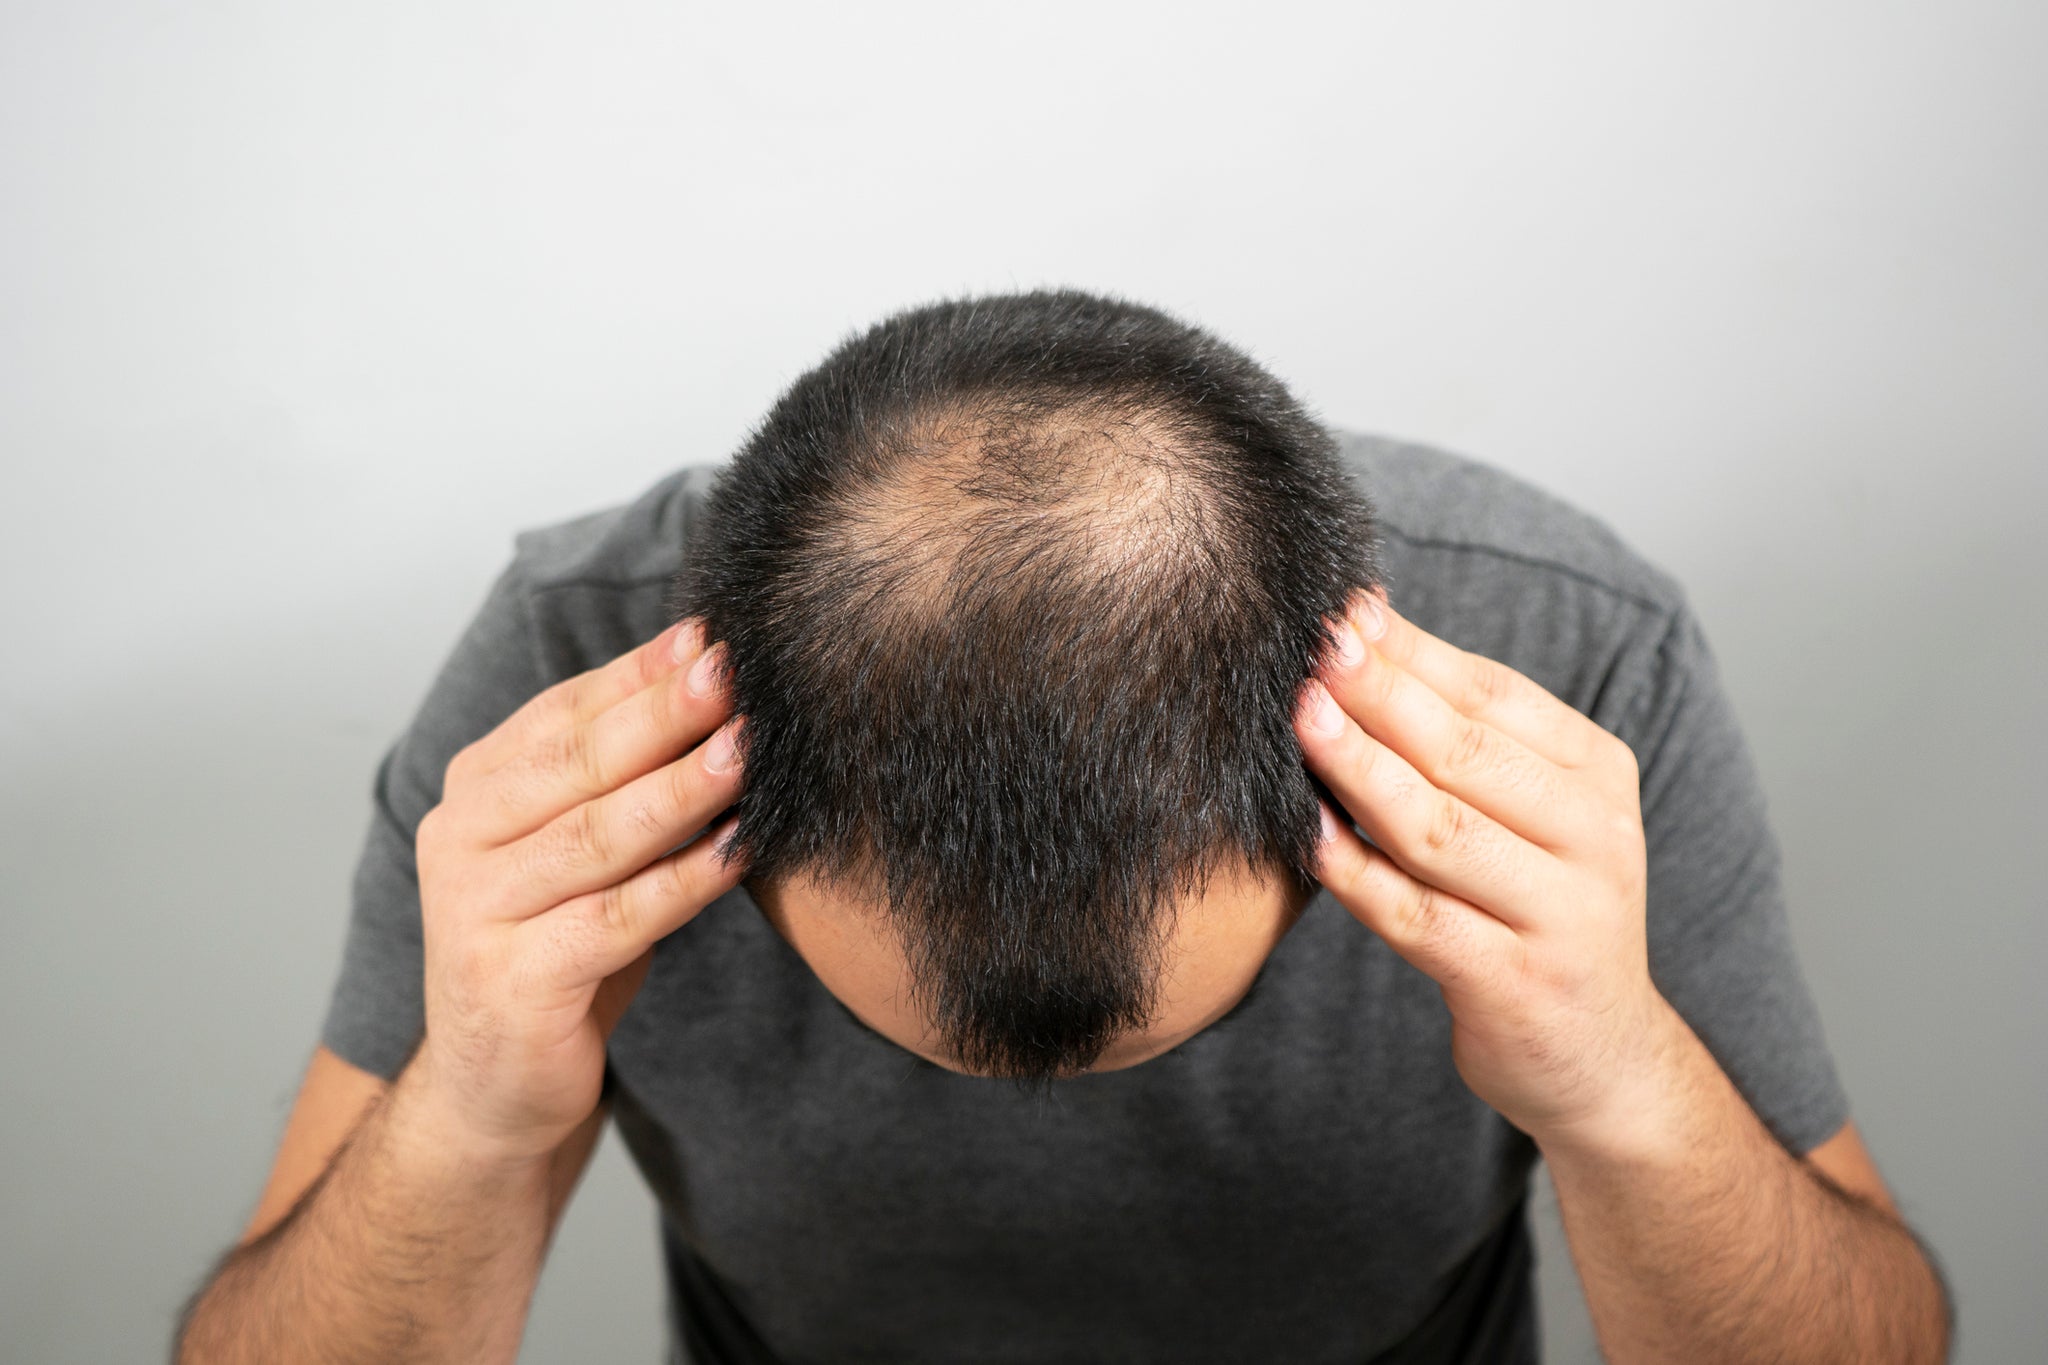 Various stages of baldness and how to treat it